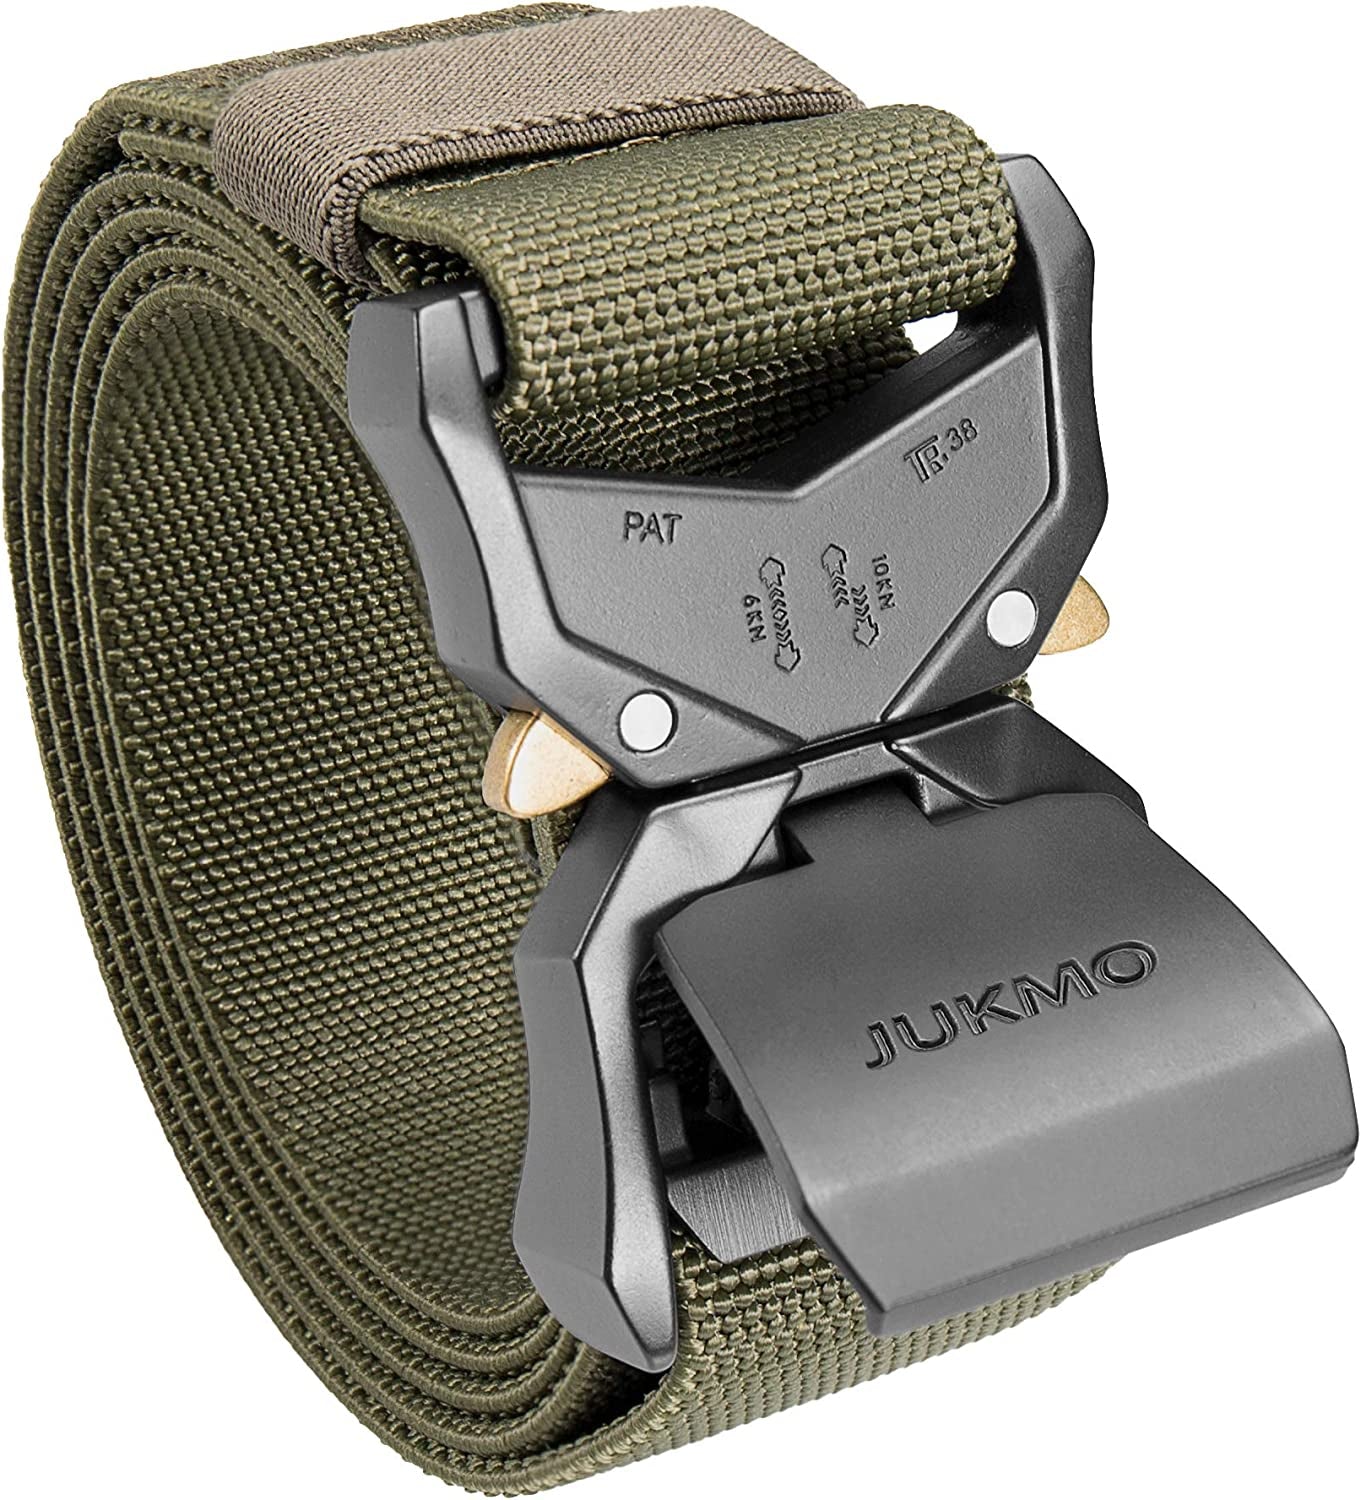 JUKMO Tactical Belt, Military Hiking Rigger 1.5" Nylon Web Work Belt with Heavy Duty Quick Release Buckle Animals & Pet Supplies > Pet Supplies > Dog Supplies > Dog Apparel JUKMO Amy Green Small-for Waist 30"-36" (Length 45") 